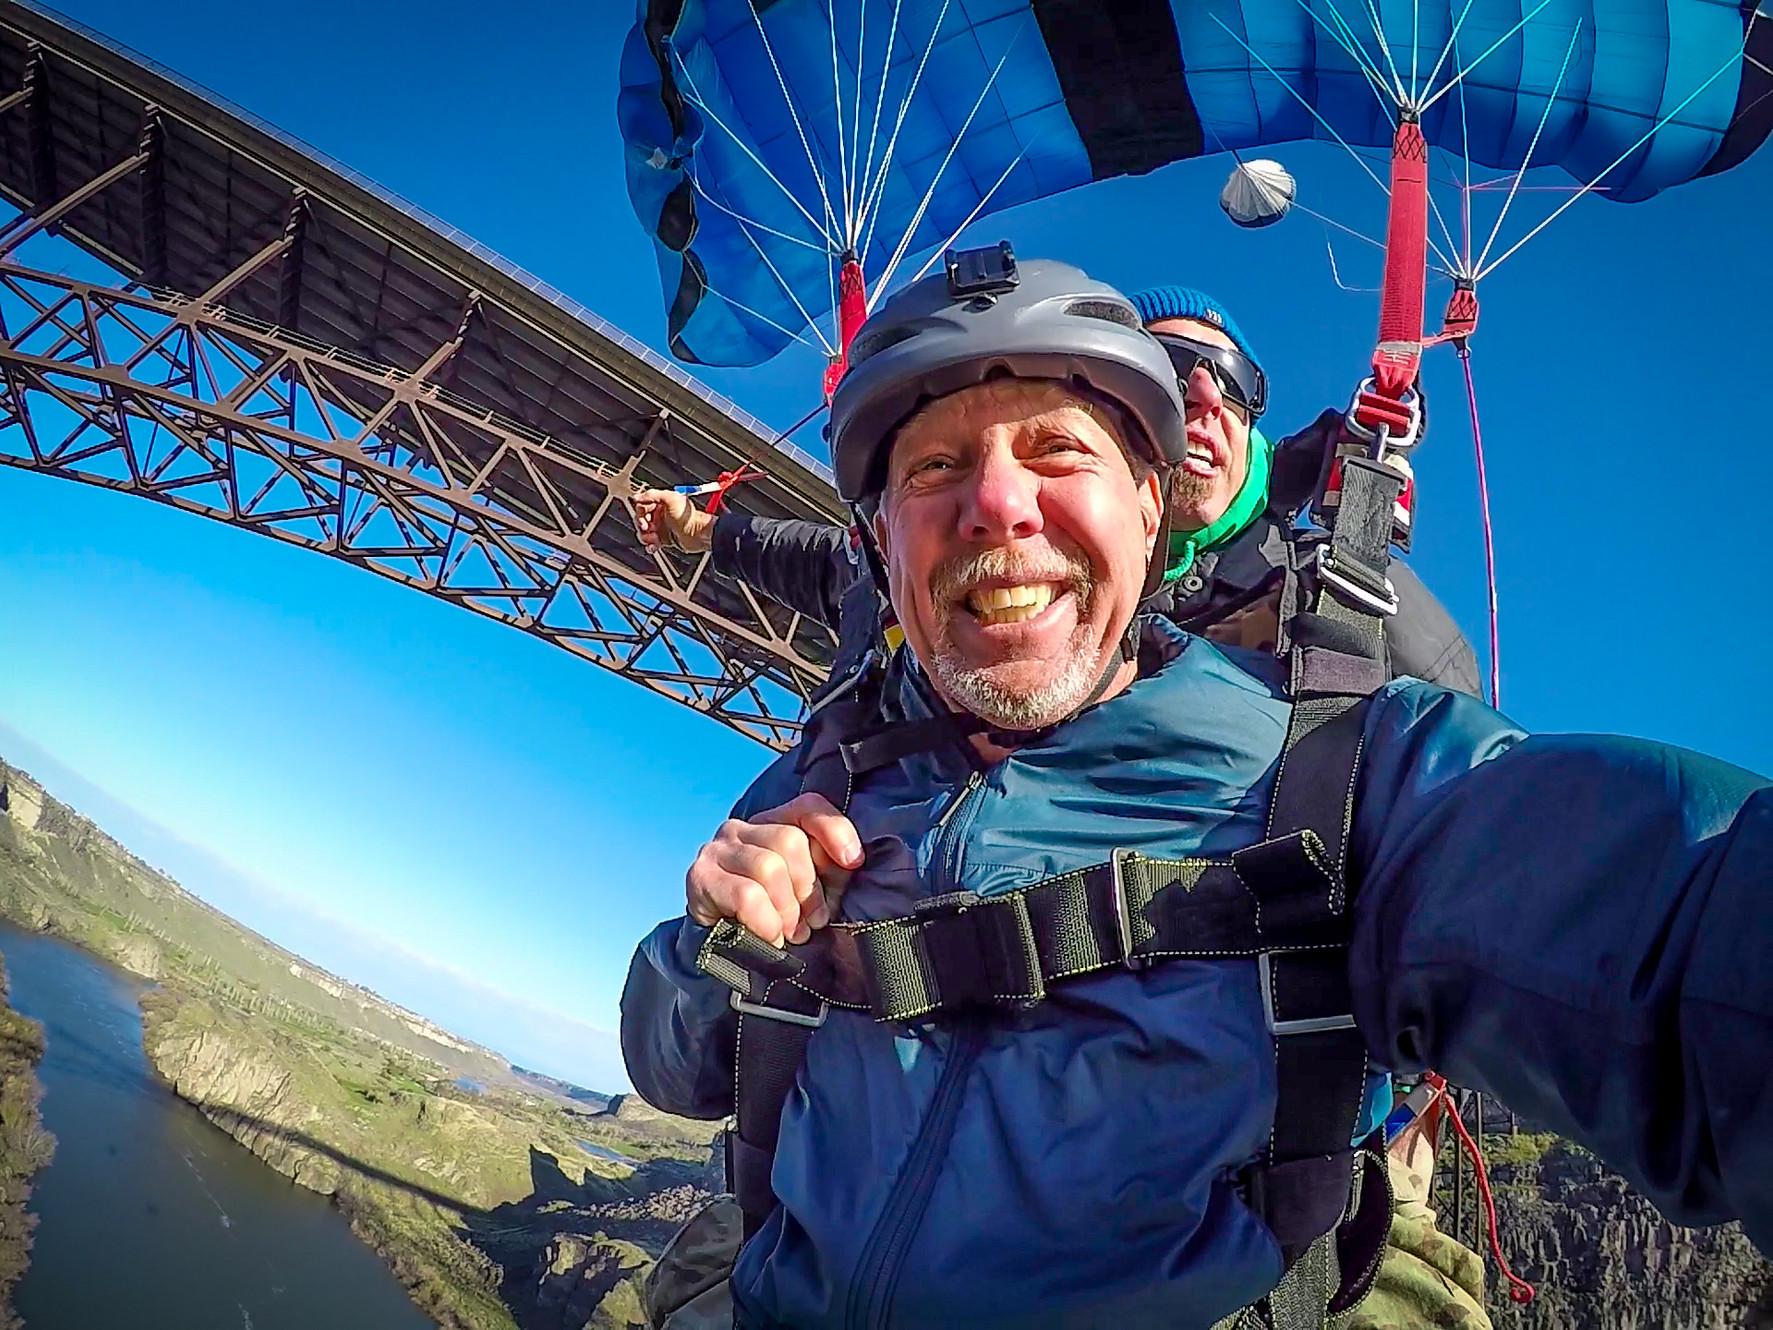 About Base jumping with a Tandem BASE jump instructor | Tandembase